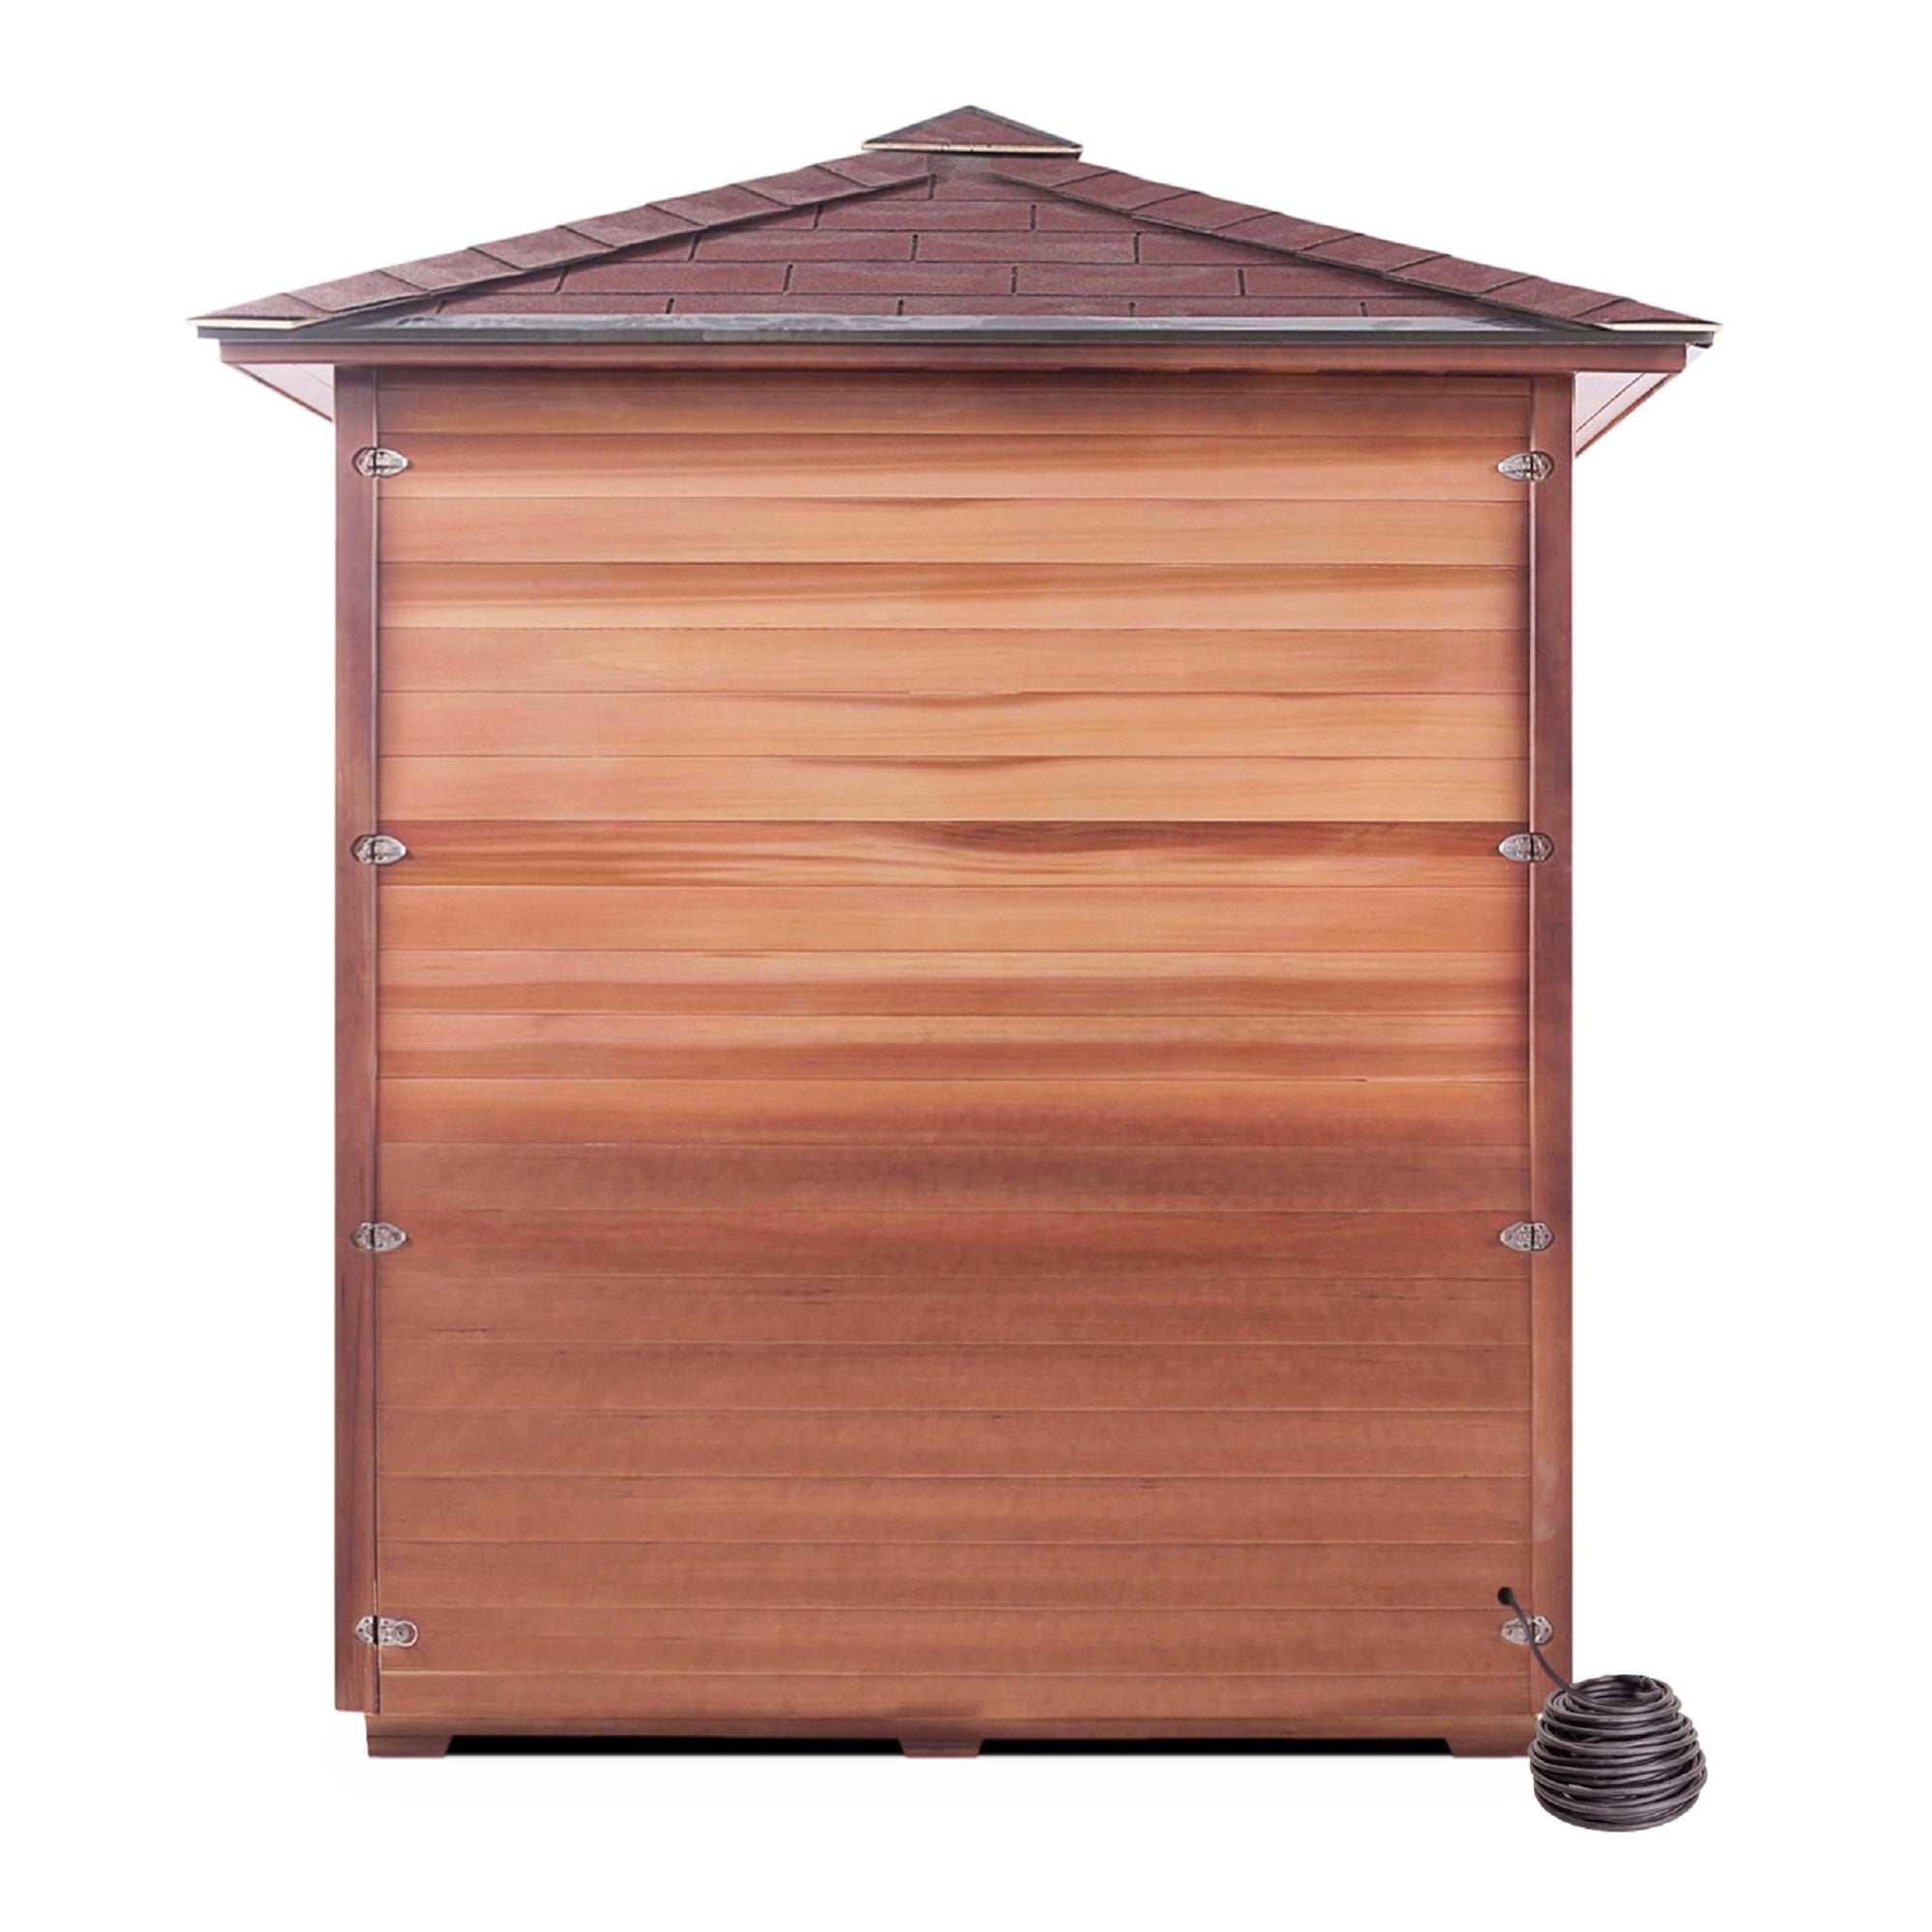 Enlighten Sauna Dry traditional SunRise Outdoor Canadian Red Cedar Wood Outside And Inside Peak Roofed with glass door and windows four person sauna front view